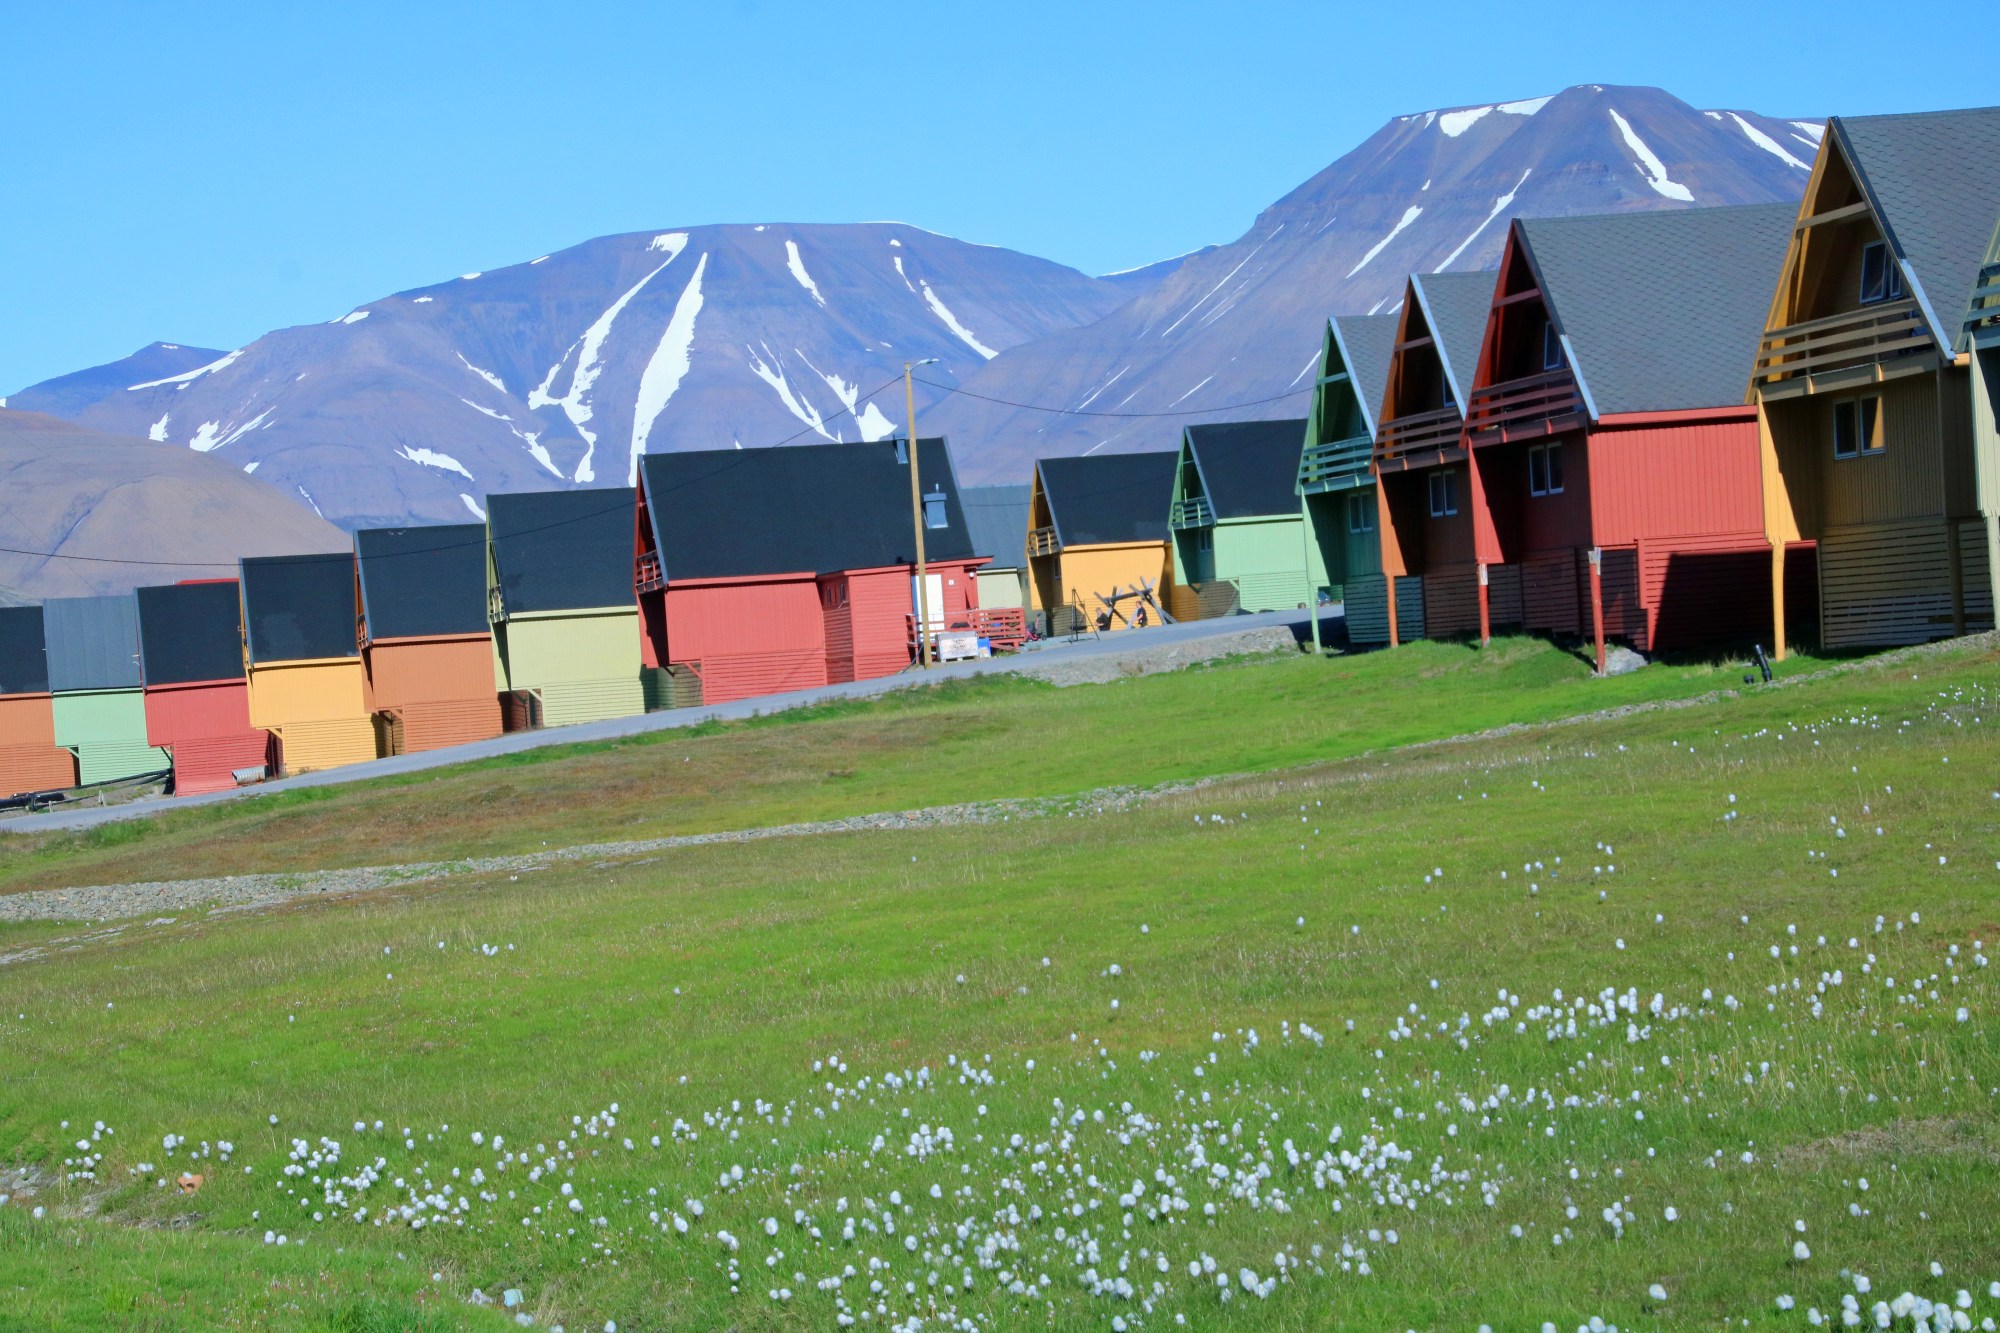 Longyearbyen: The Northernmost Settlement - Life on Svalbard: The Arctic Wilderness and Its Inhabitants